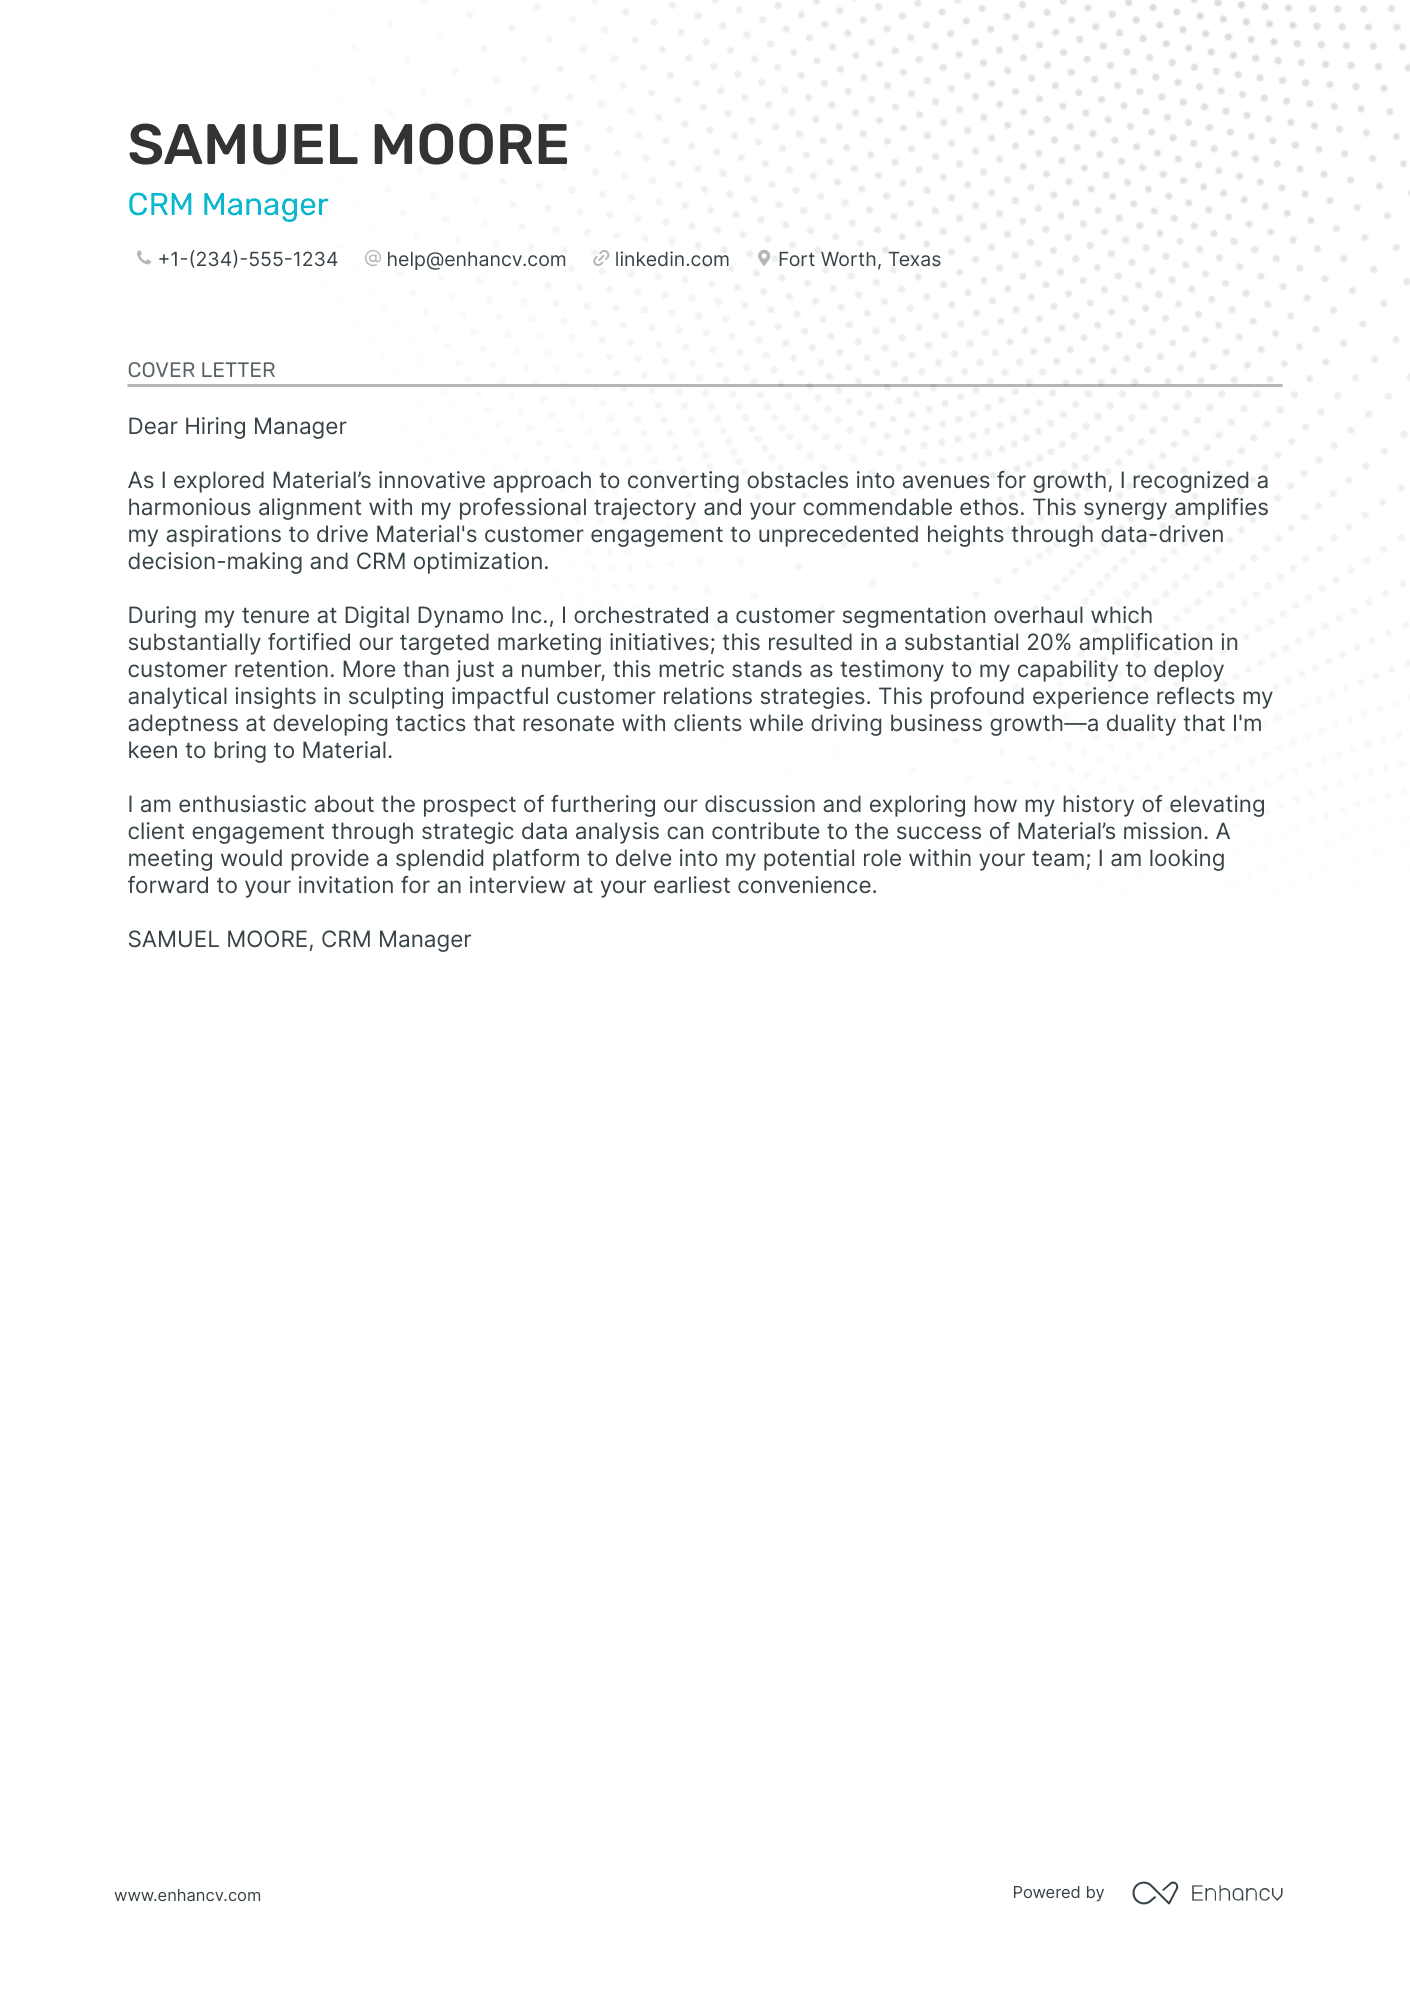 CRM Manager cover letter